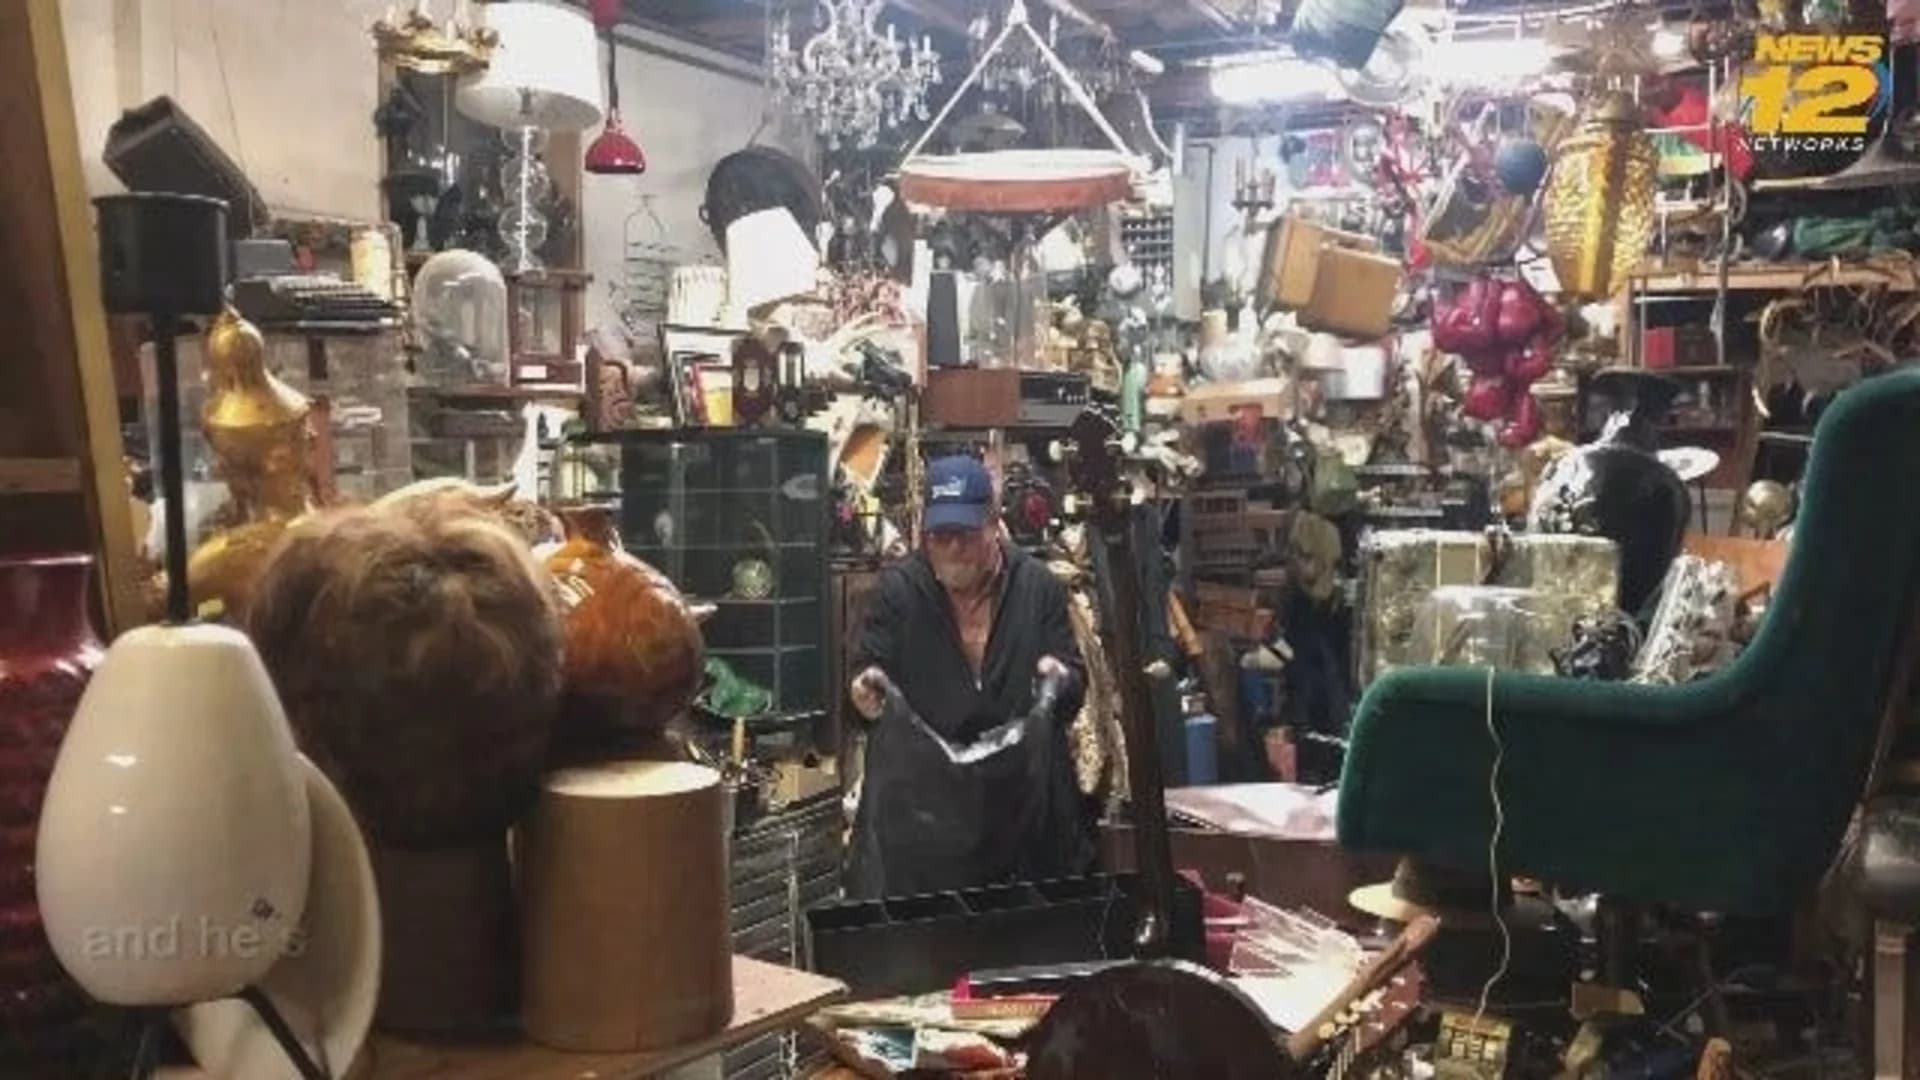 Bushwick vintage warehouse features thousands of one-of-a-kind items